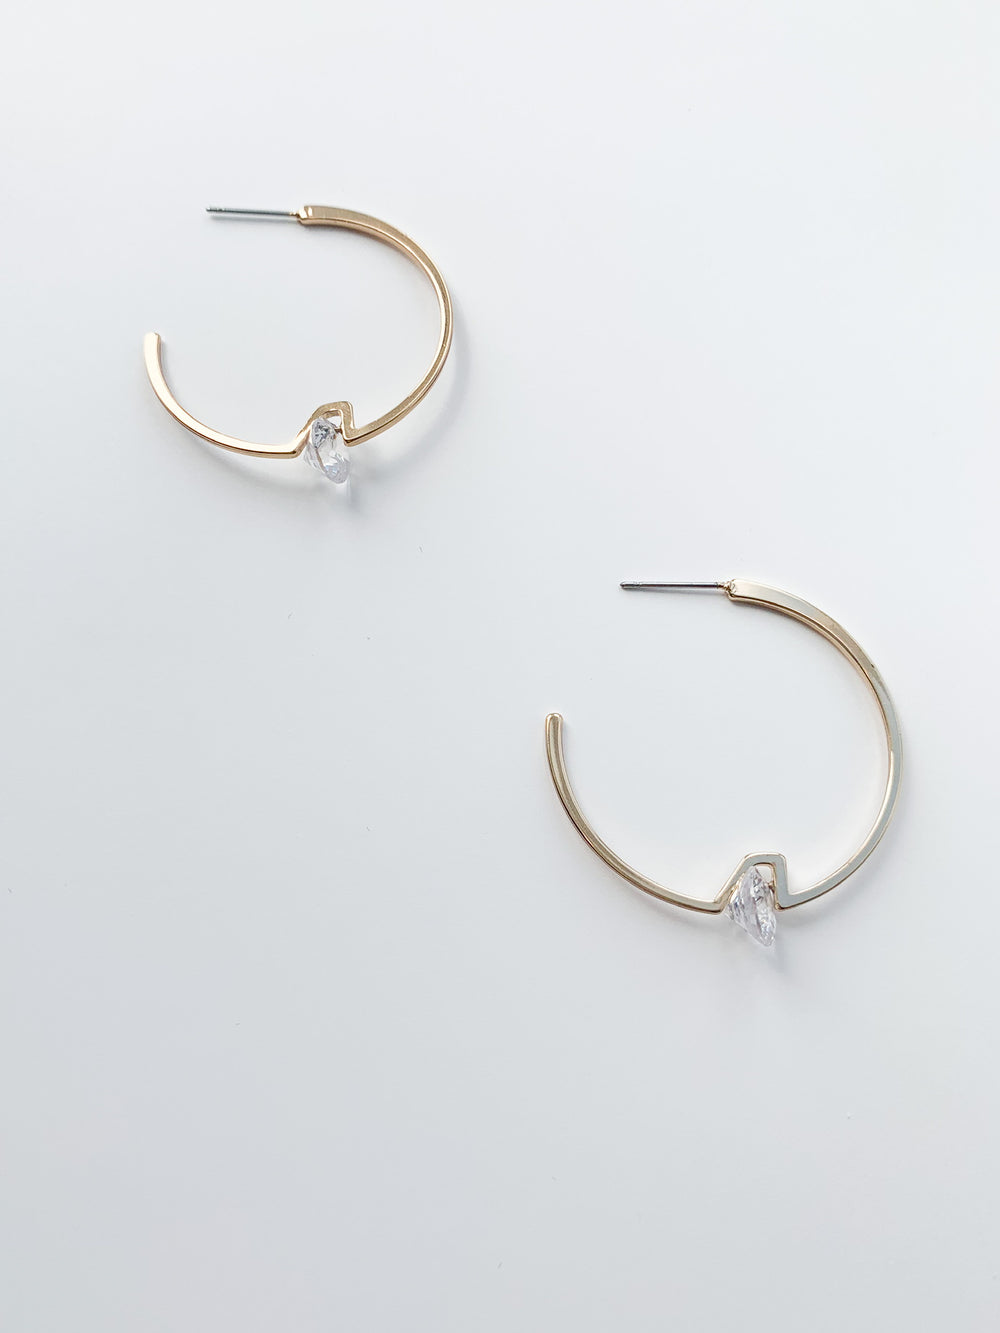 Gold Sammy Hoop earrings with clear crystal accent at bottom center of hoop